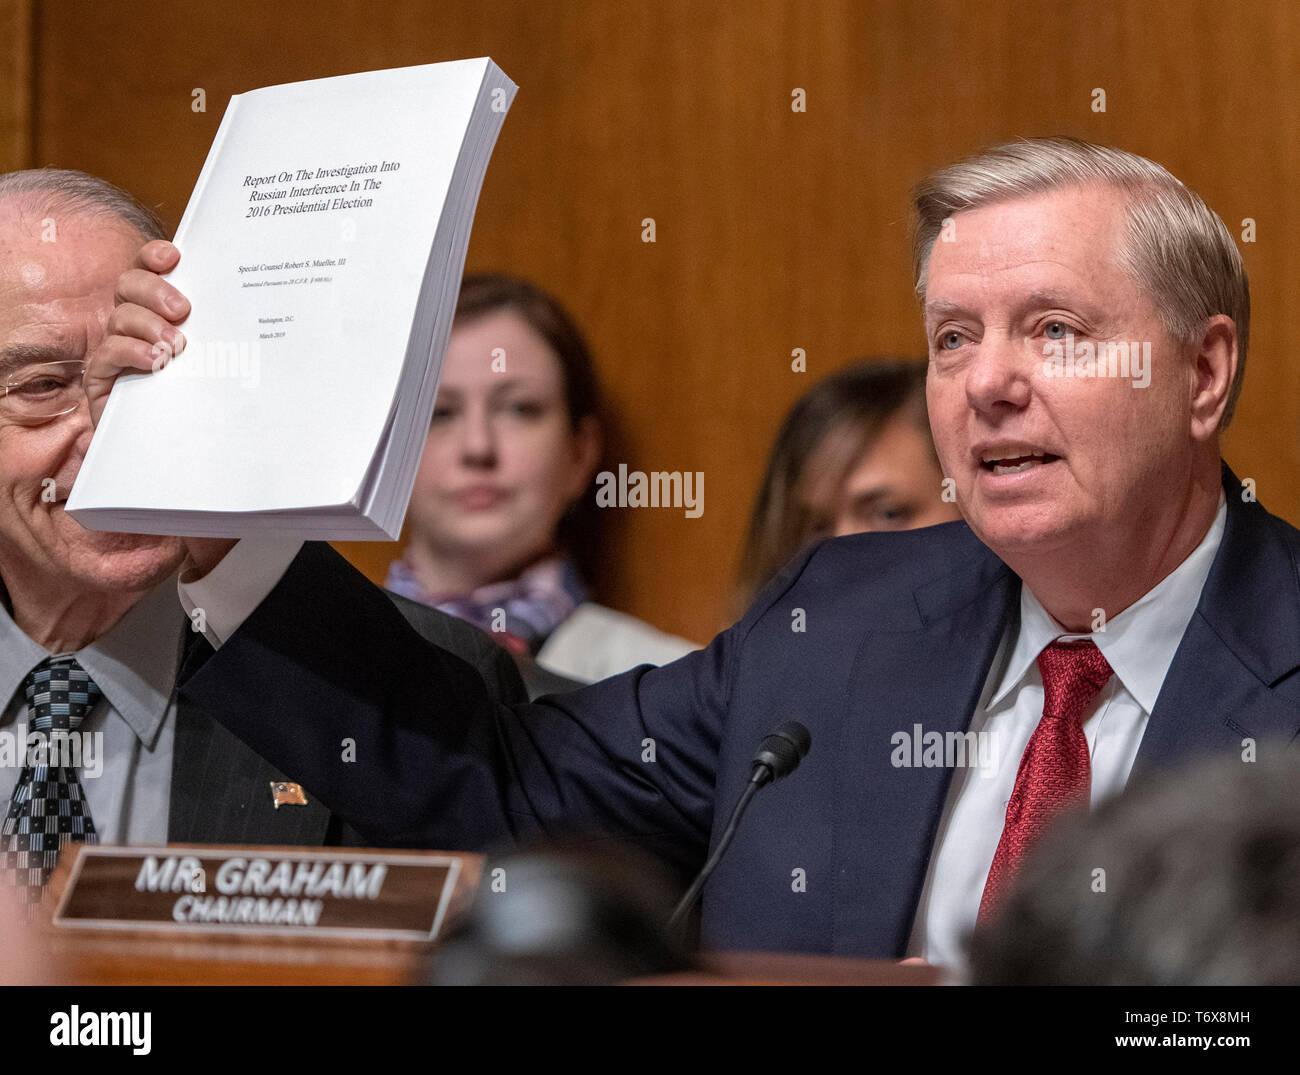 United States Senator Lindsey Graham (Republican of South Carolina), Chairman, US Senate Judiciary Committee, holds a copy of the Mueller Report as he makes his opening statement prior to US Attorney General William P. Barr giving testimony before the US Senate Committee on the Judiciary on the “Department of Justice's Investigation of Russian Interference with the 2016 Presidential Election” on Capitol Hill in Washington, DC on May 1, 2019. The hearing will begin to answer questions about how the DOJ handled the conclusions from the Mueller probe. Credit: Ron Sachs/CNP (RESTRICTION: NO Ne Stock Photo